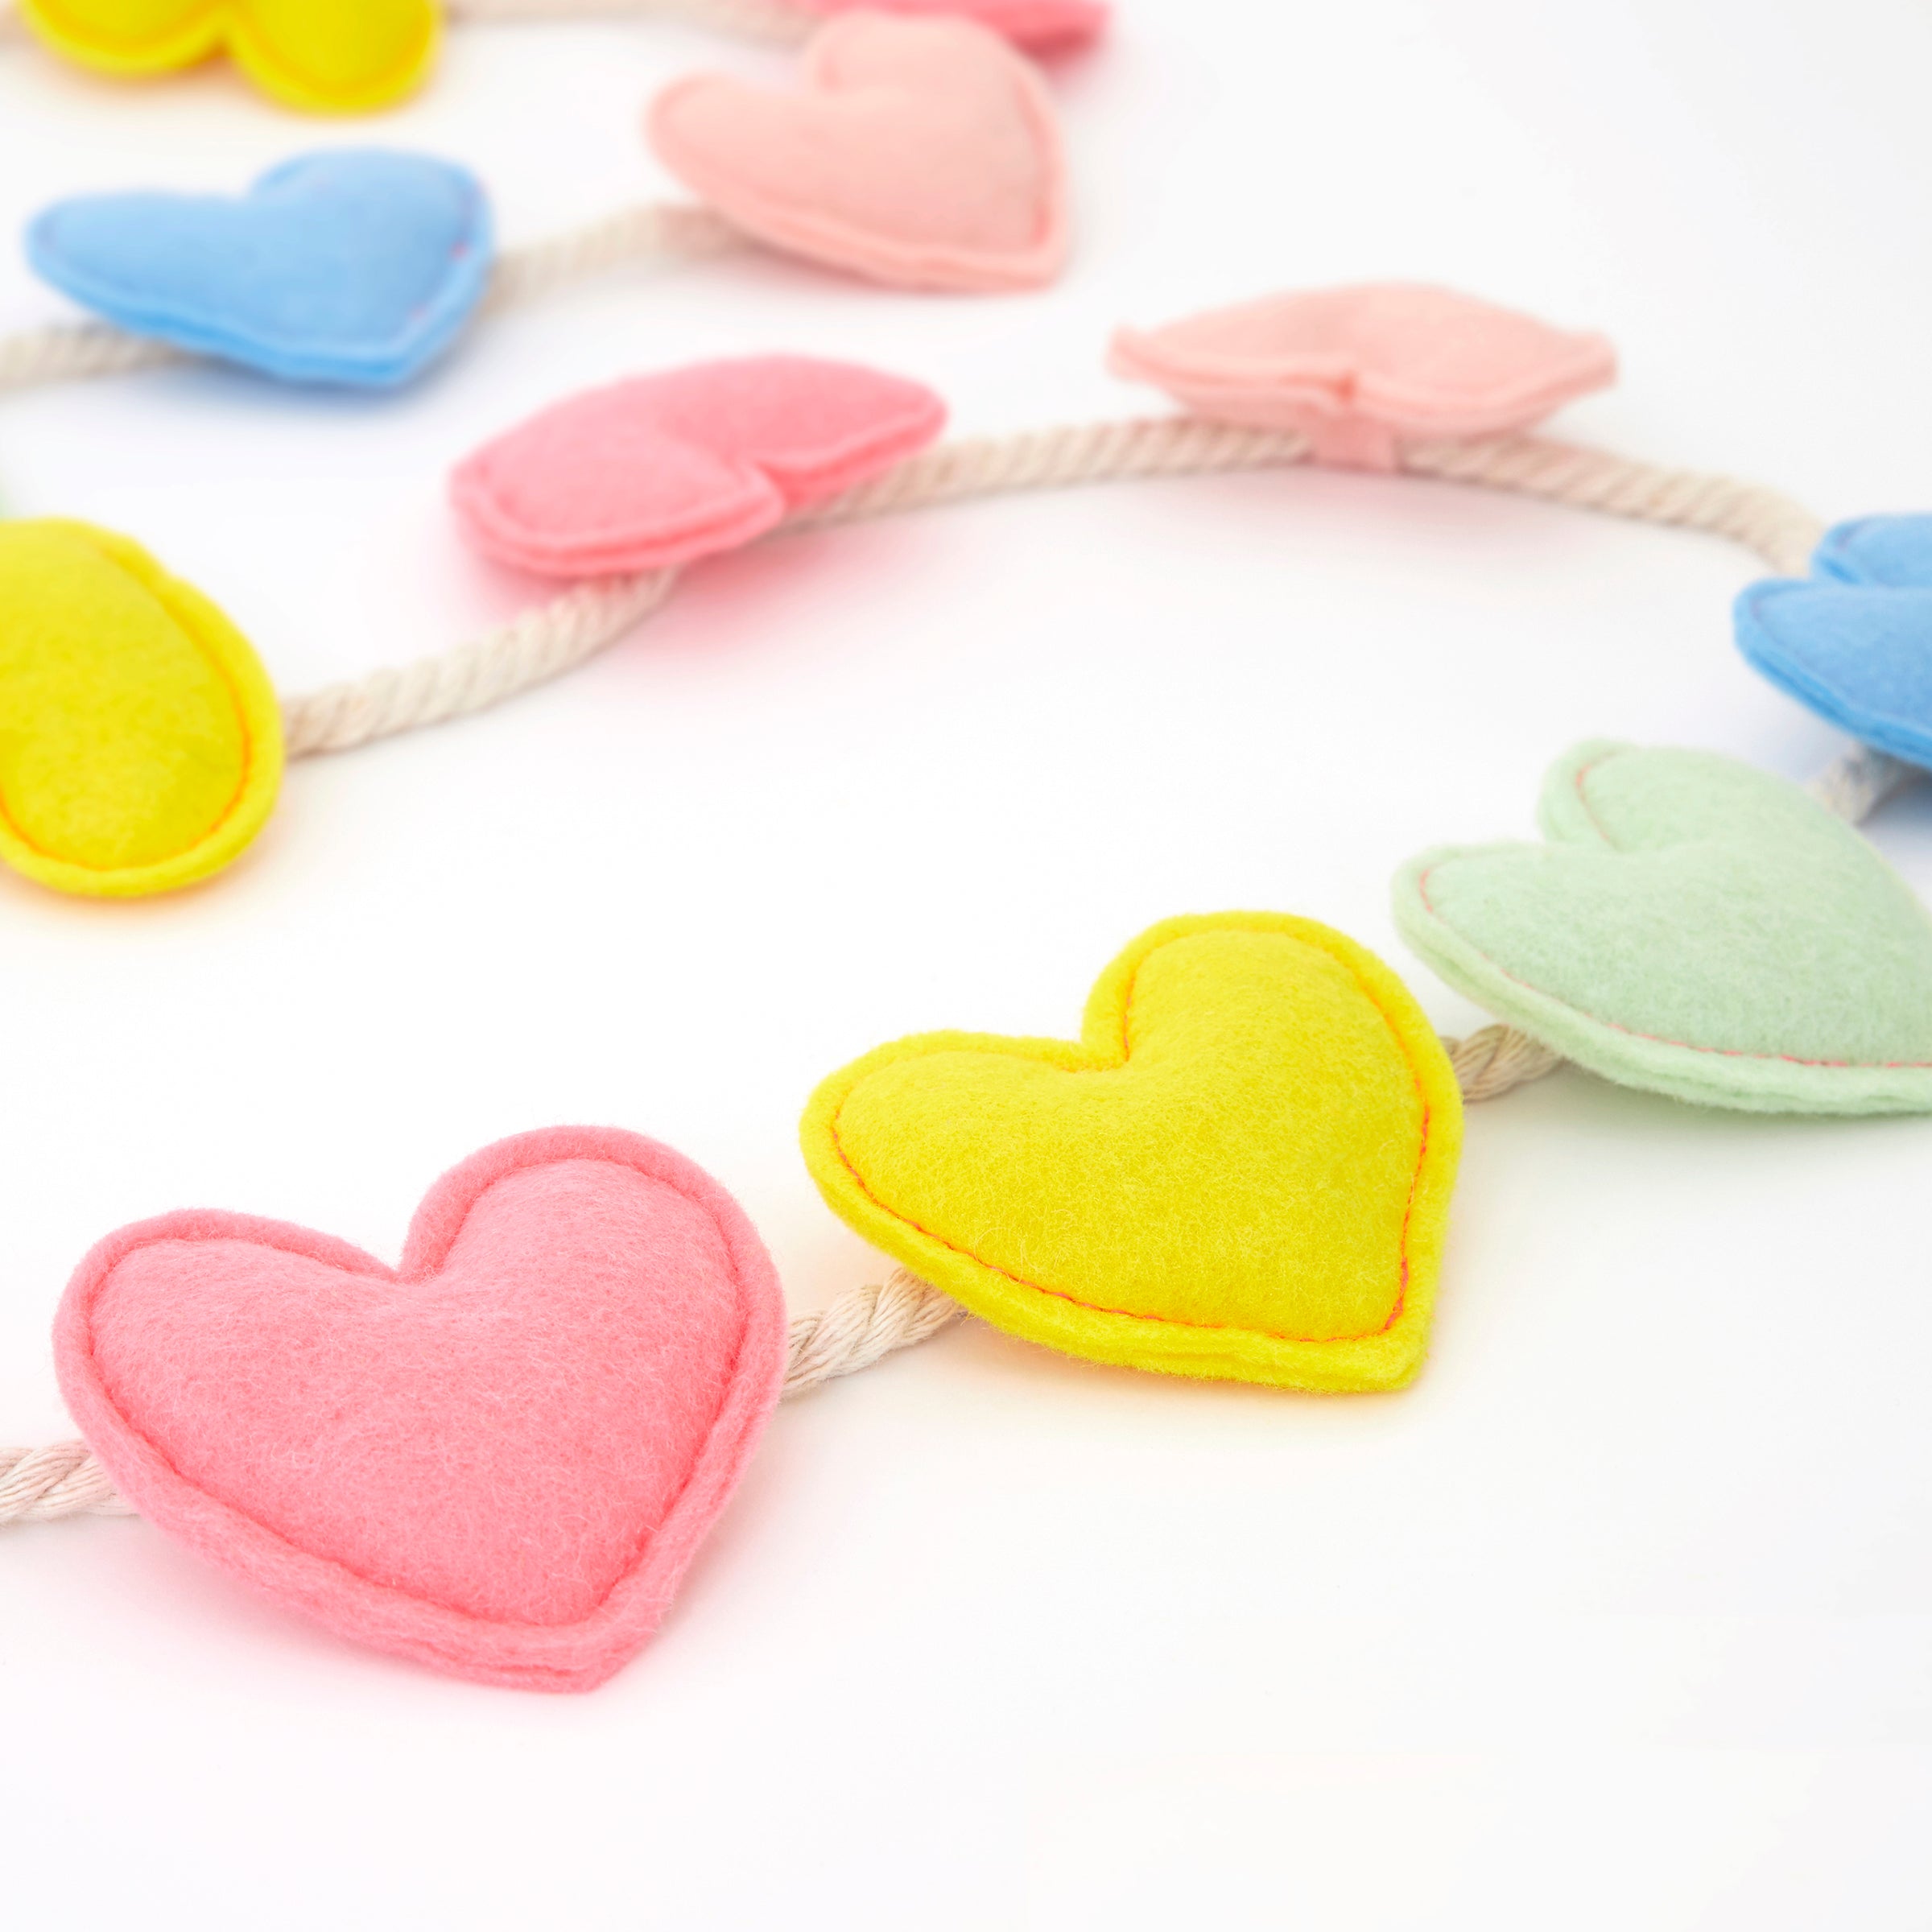 Our felt garland, featuring colourful hearts, is the perfect anniversary decoration or Valentine's Day decoration.